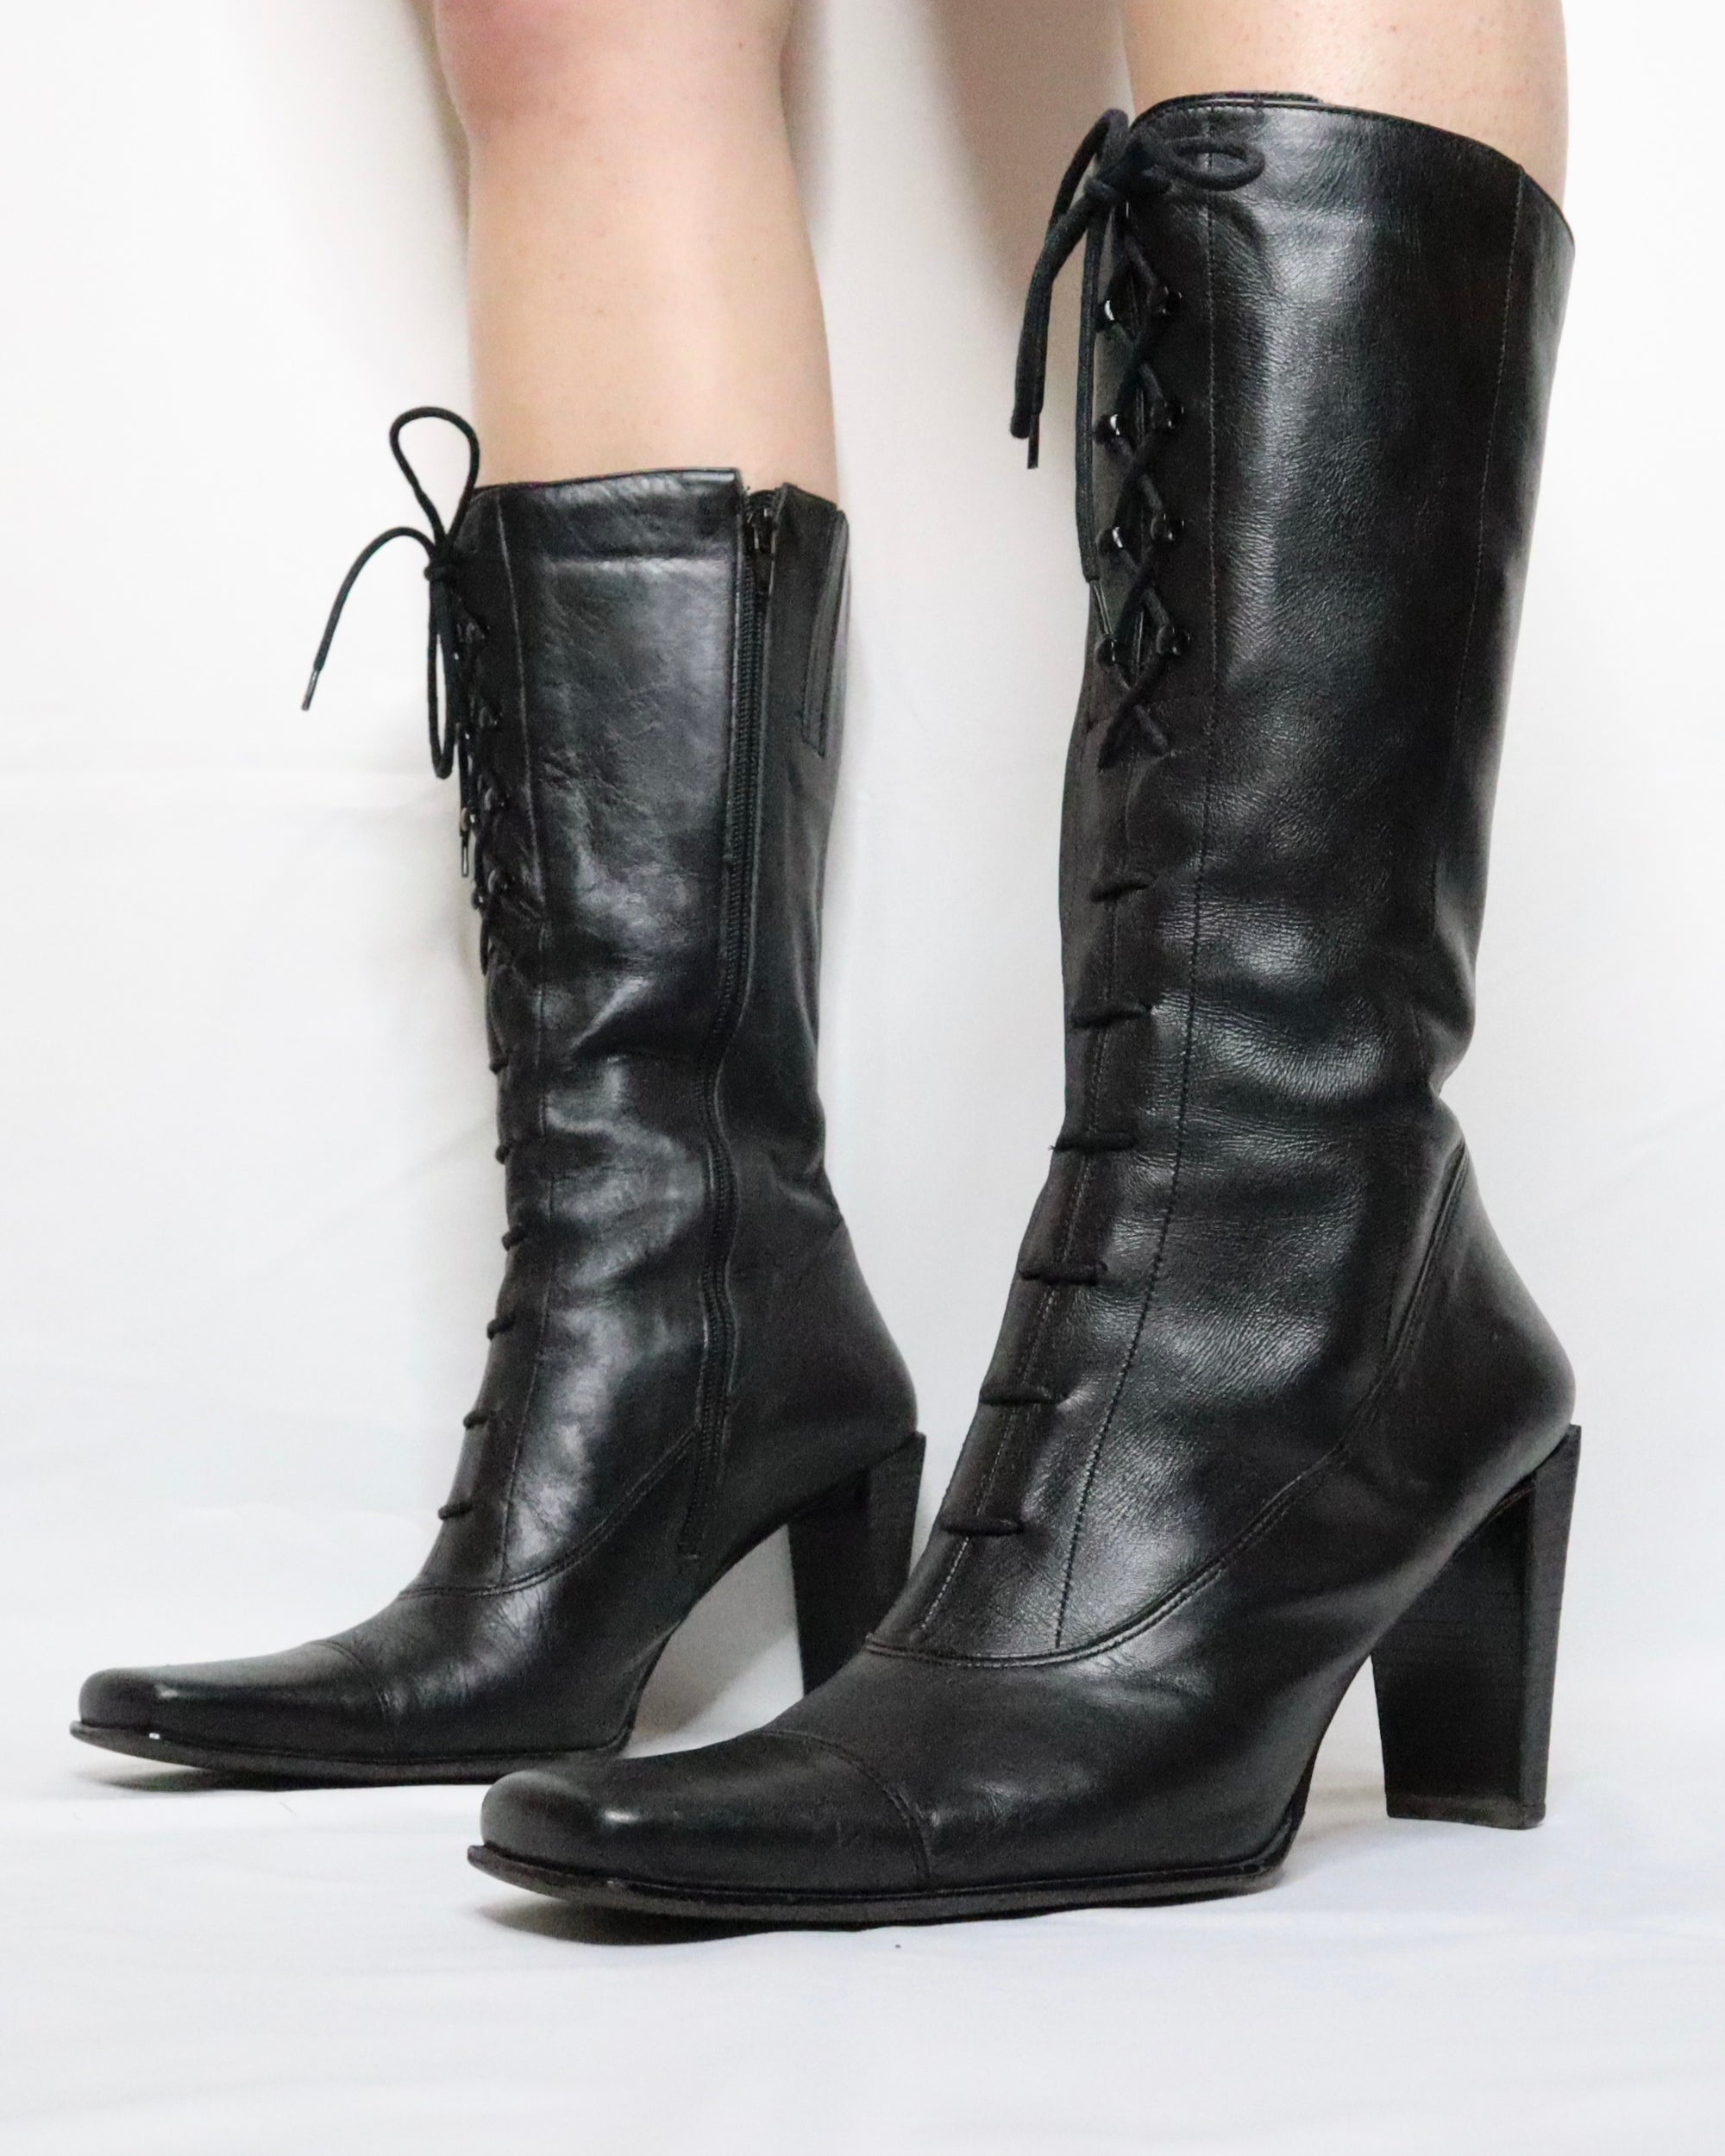 Black Leather Lace Up Boots (8.5-9 US) 